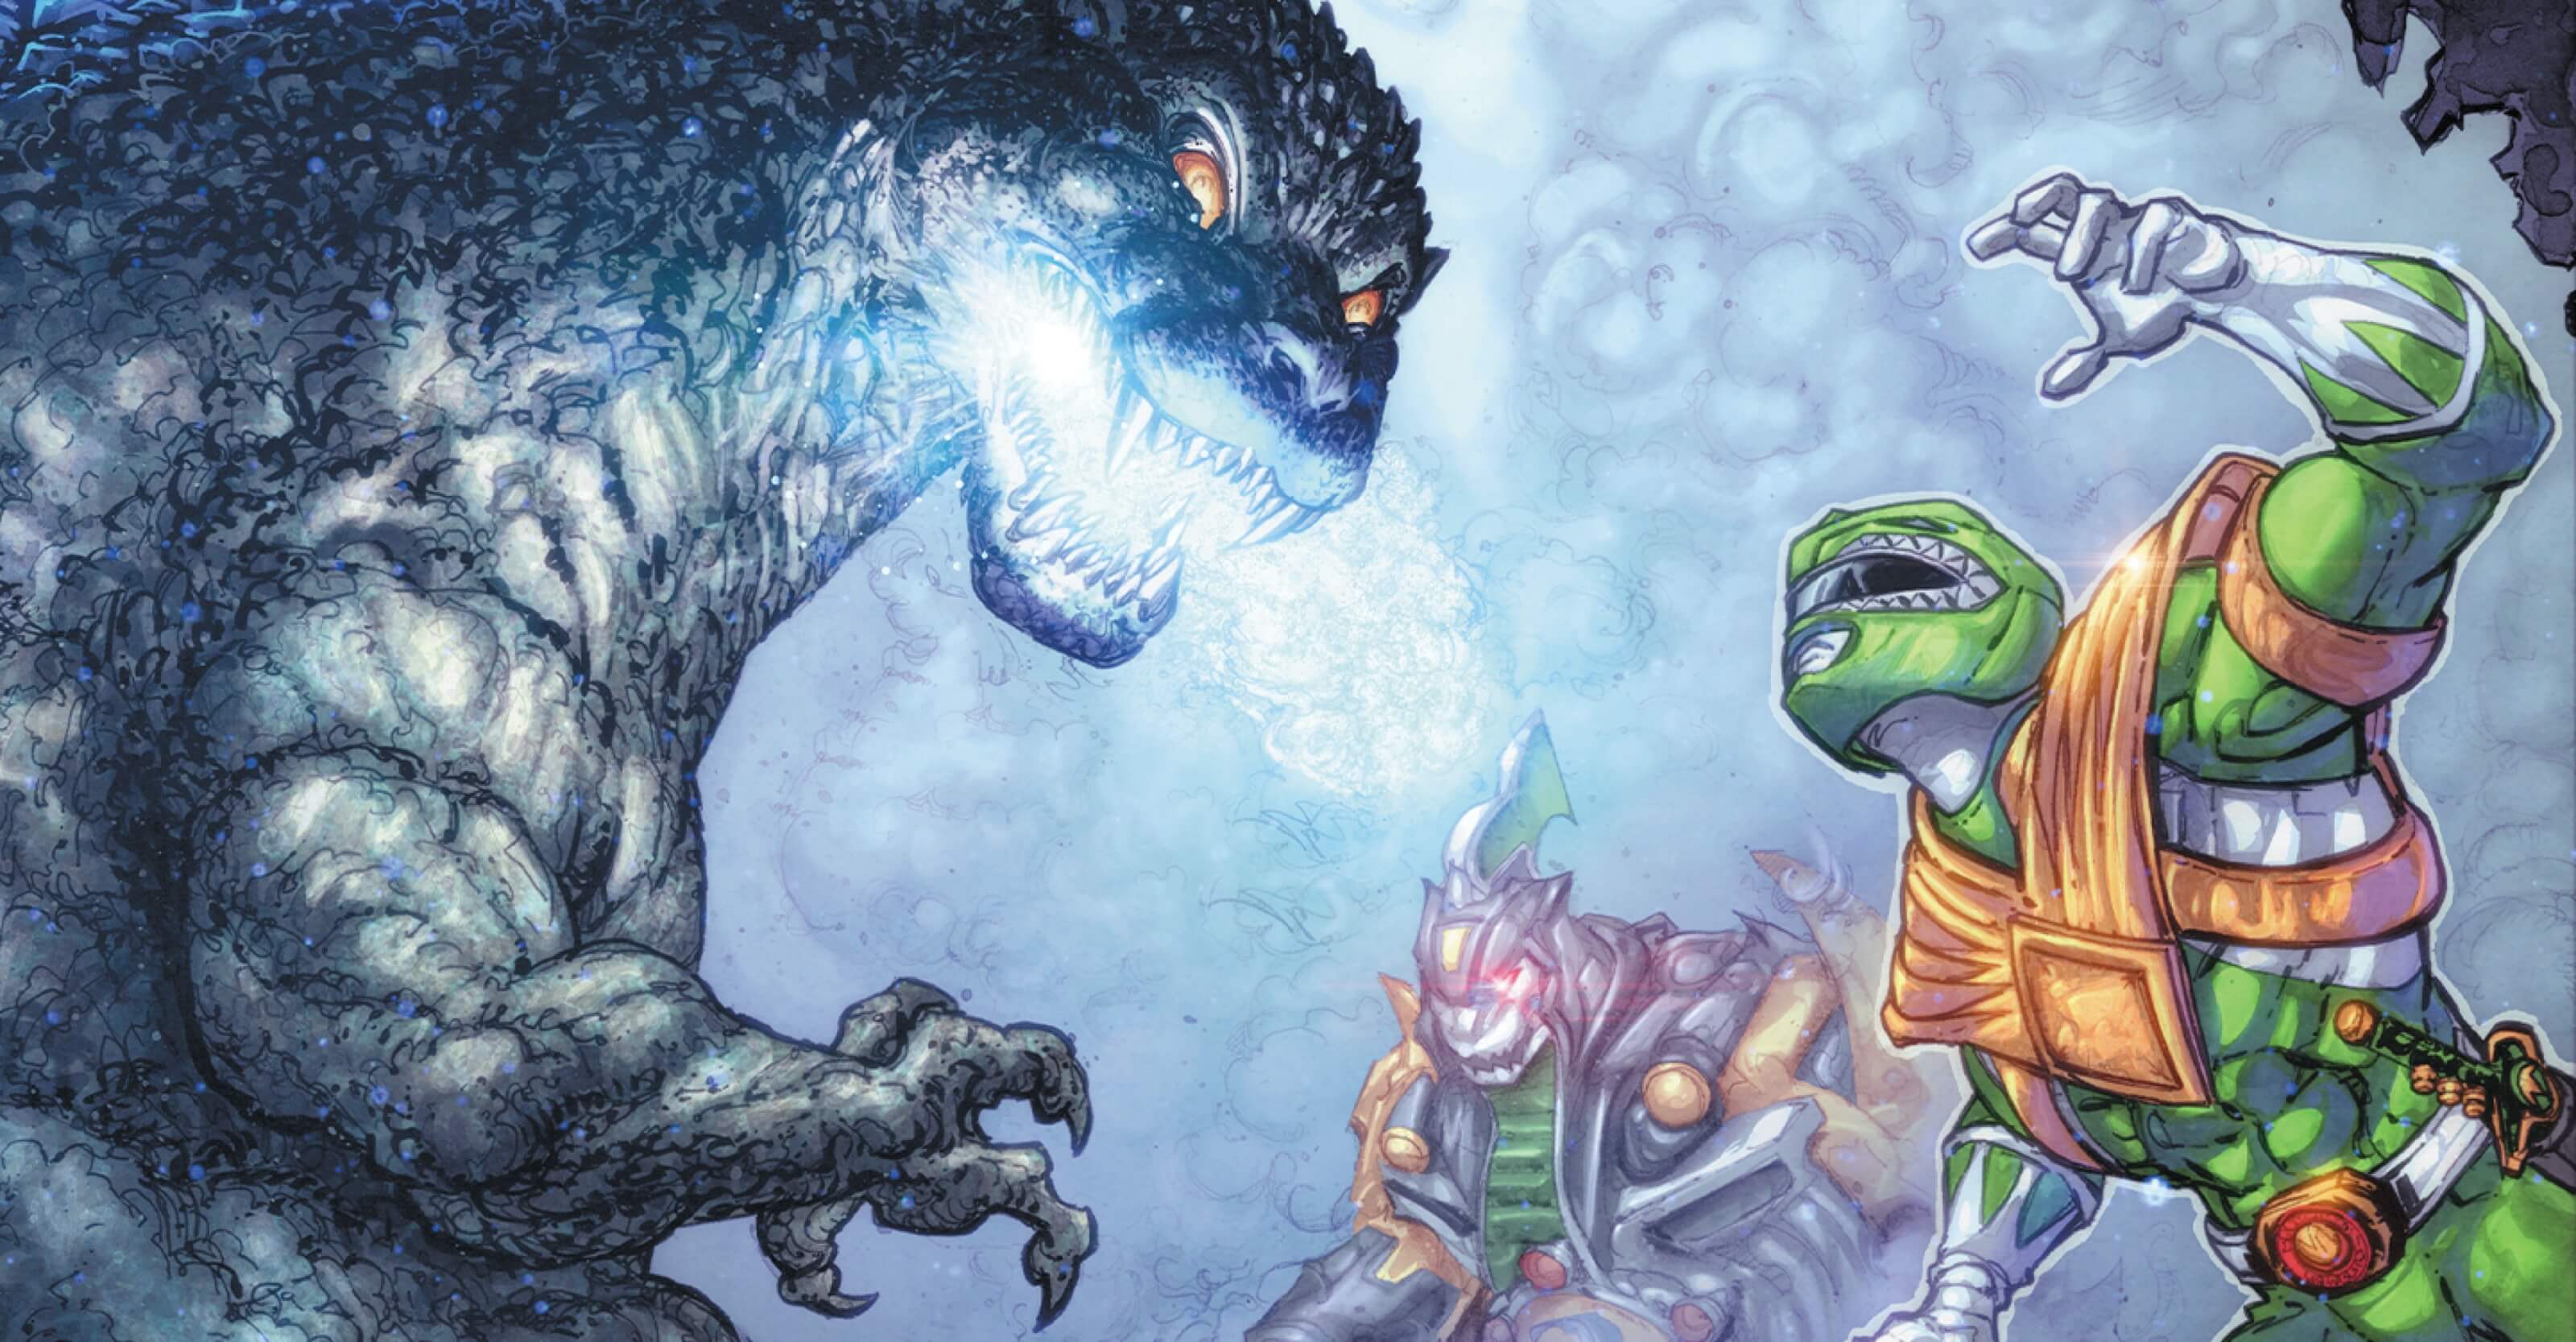 Godzilla and Mighty Morphin Power Rangers Meet for the First Time in Crossover Comic Series from IDW